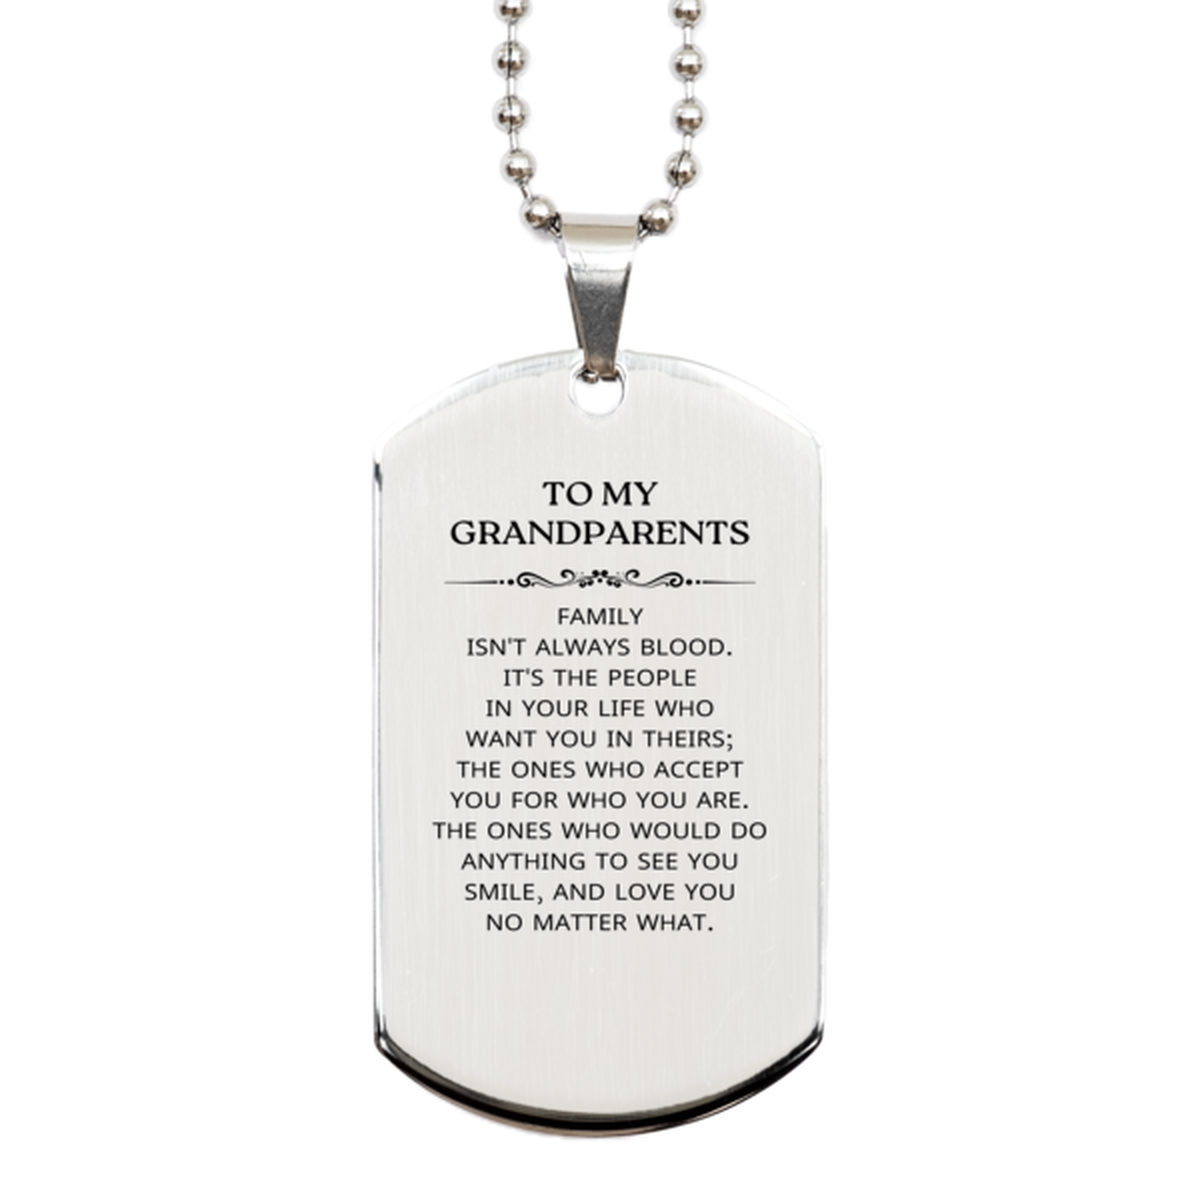 To My Grandparents Gifts, Family isn't always blood, Grandparents Silver Dog Tag, Birthday Christmas Unique Present For Grandparents